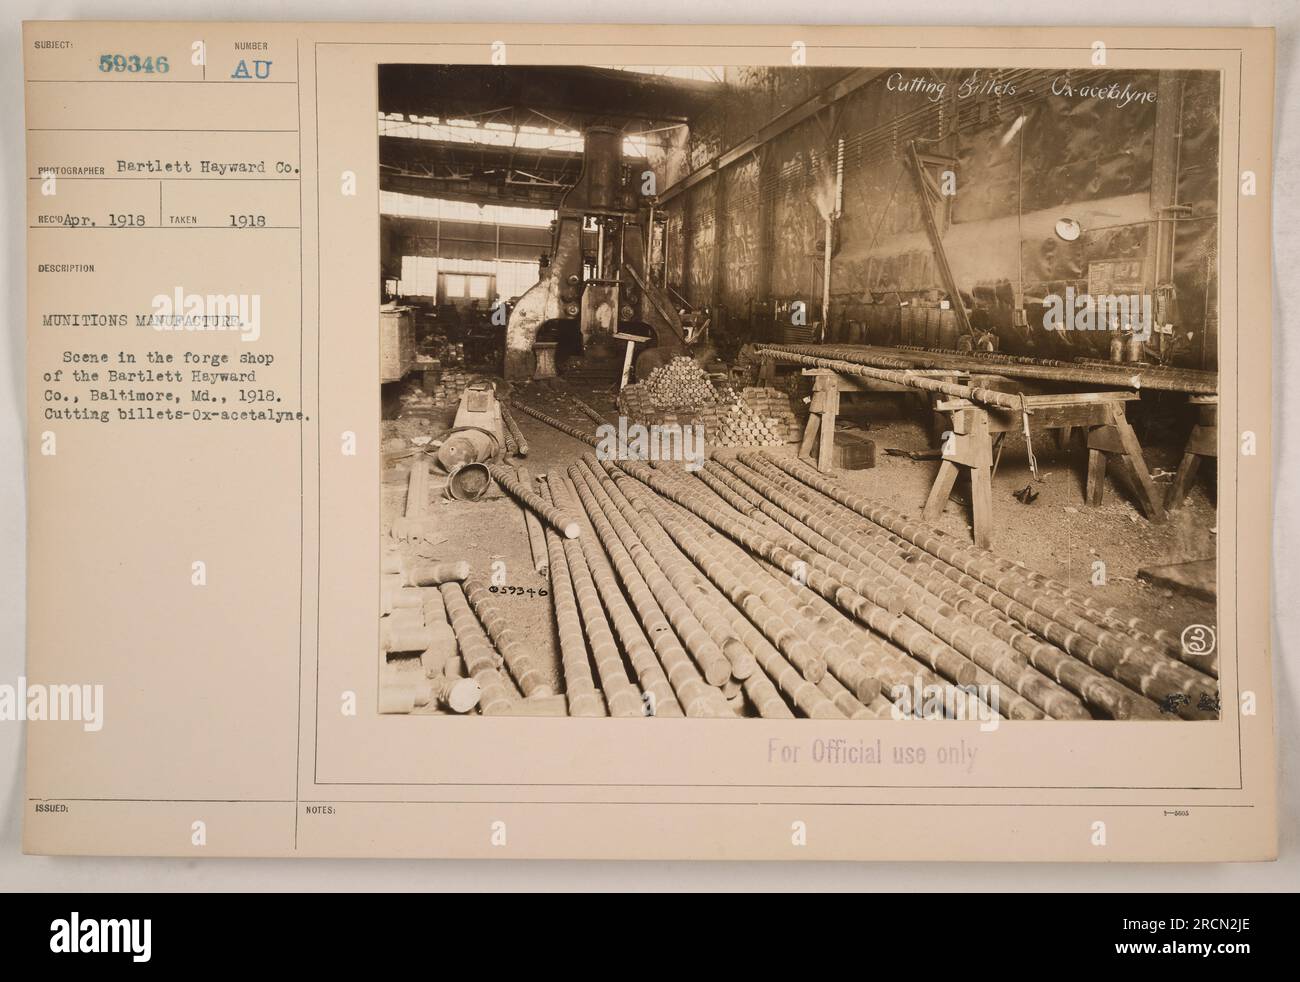 Scene in the forge shop of the Bartlett-Hayward Co. in Baltimore, Maryland in 1918. The workers are seen cutting billets using Ox-acetylene. This photograph was taken for documentation of munitions manufacturing during World War One. The image is labeled subject #59346 and was captured by the Bartlett Hayward Co. in April 1918. The photograph is marked 'For Official use only.' Stock Photo